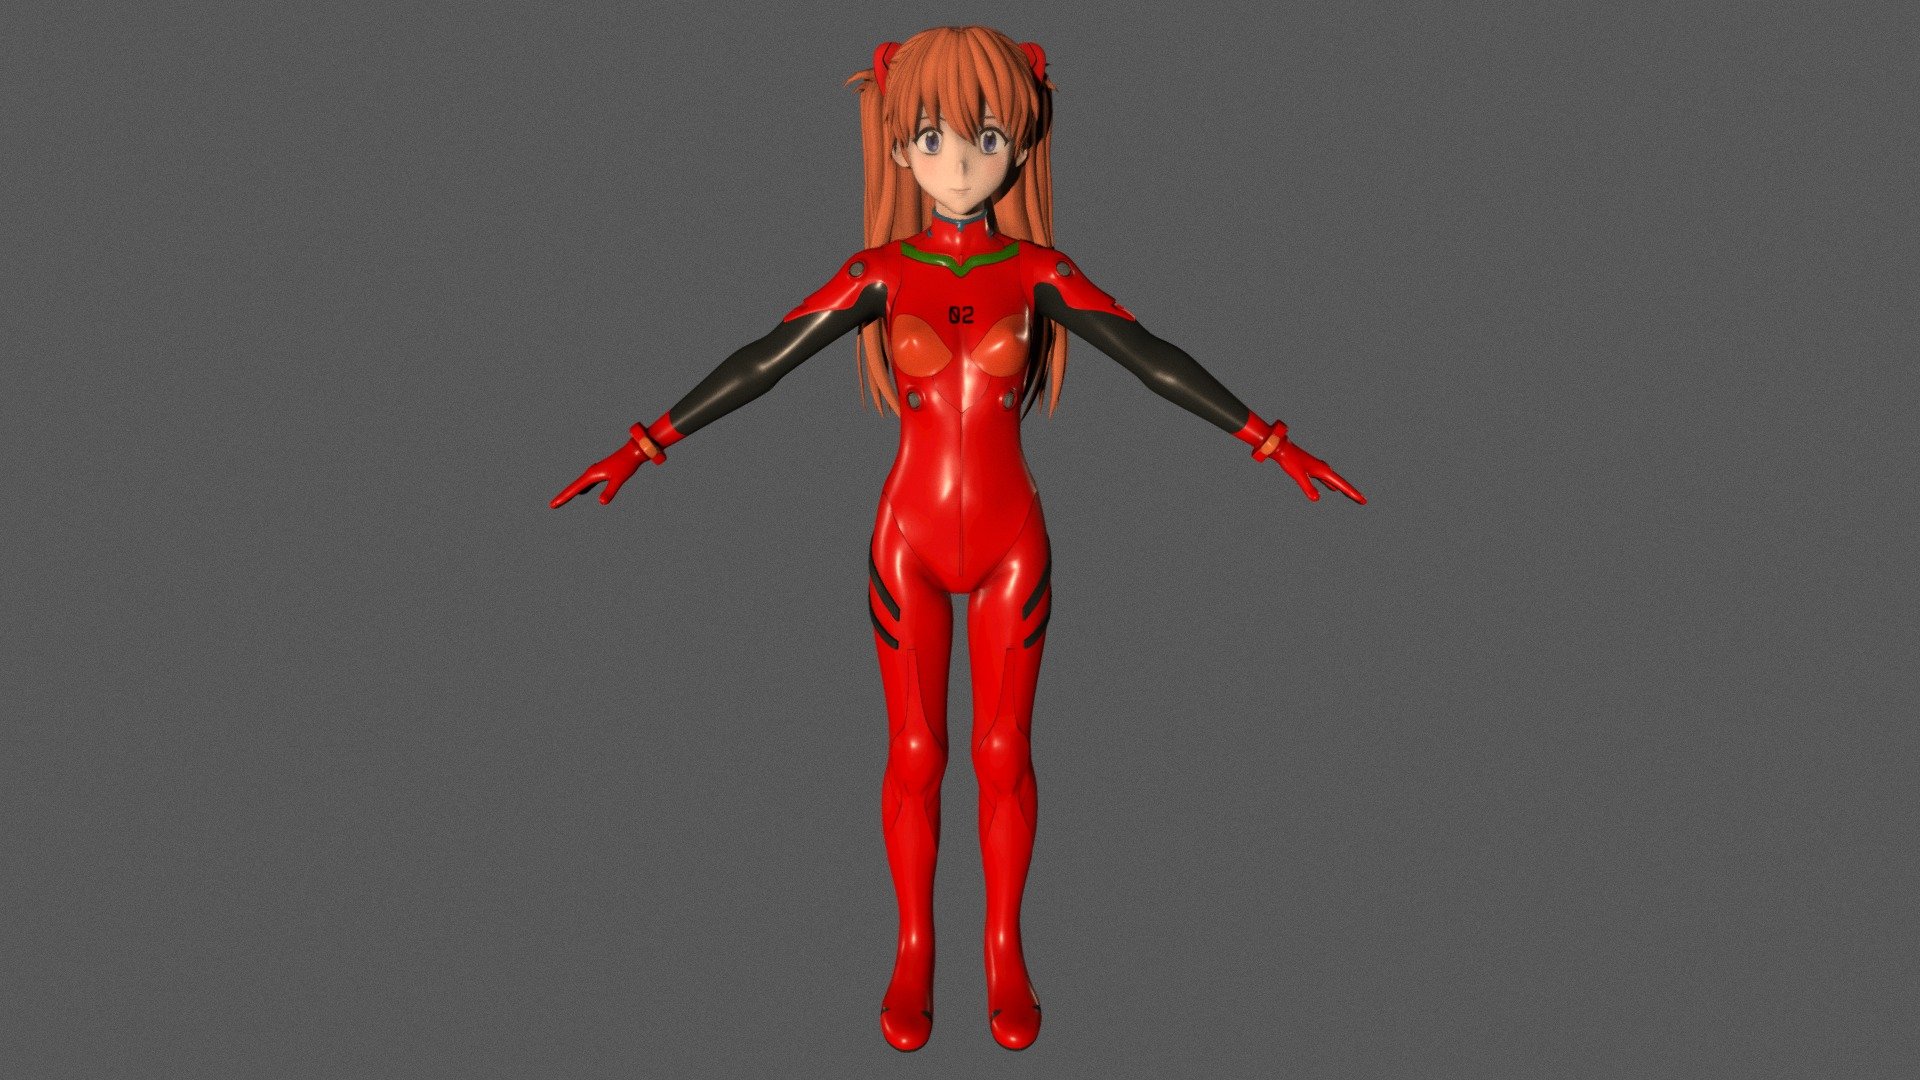 T-pose rigged model of anime girl Asuka Langley Soryu (Neon Genesis Evangelion).

Body and clothings are rigged and skinned by 3ds Max CAT system.

Eye direction and facial animation controlled by Morpher modifier / Shape Keys / Blendshape.

This product include .FBX (ver. 7200) and .MAX (ver. 2010) files.

3ds Max version is turbosmoothed to give a high quality render (as you can see here).

Original main body mesh have ~7.000 polys.

This 3D model may need some tweaking to adapt the rig system to games engine and other platforms.

I support convert model to various file formats (the rig data will be lost in this process): 3DS; AI; ASE; DAE; DWF; DWG; DXF; FLT; HTR; IGS; M3G; MQO; OBJ; SAT; STL; W3D; WRL; X.

You can buy all of my models in one pack to save cost: https://sketchfab.com/3d-models/all-of-my-anime-girls-c5a56156994e4193b9e8fa21a3b8360b

And I can make commission models.

If you have any questions, please leave a comment or contact me via my email 3d.eden.project@gmail.com 3d model